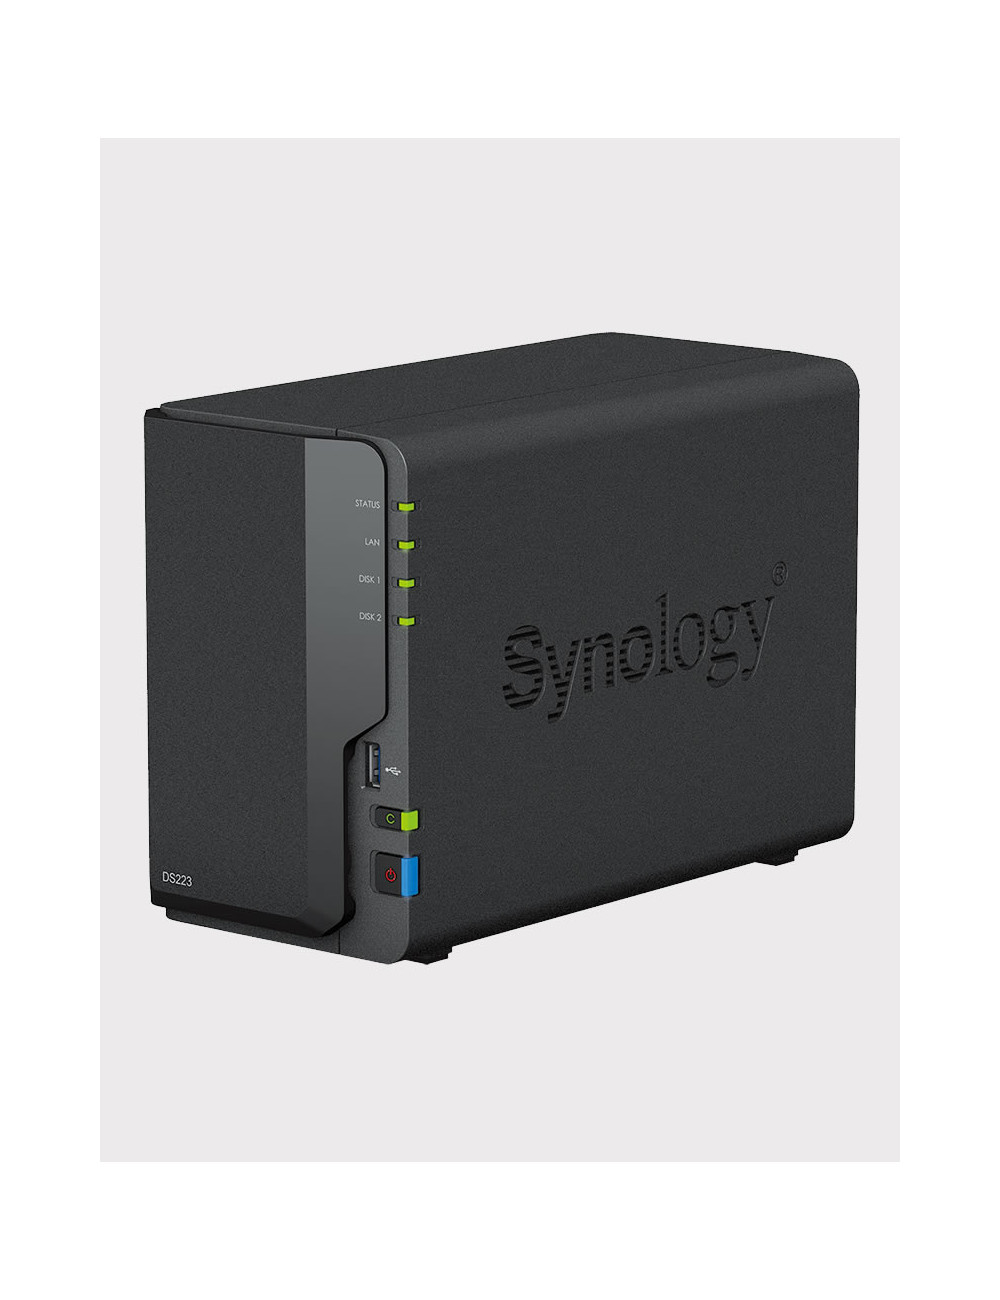 Synology DS223 Serveur NAS IronWolf 4To (2x2To)